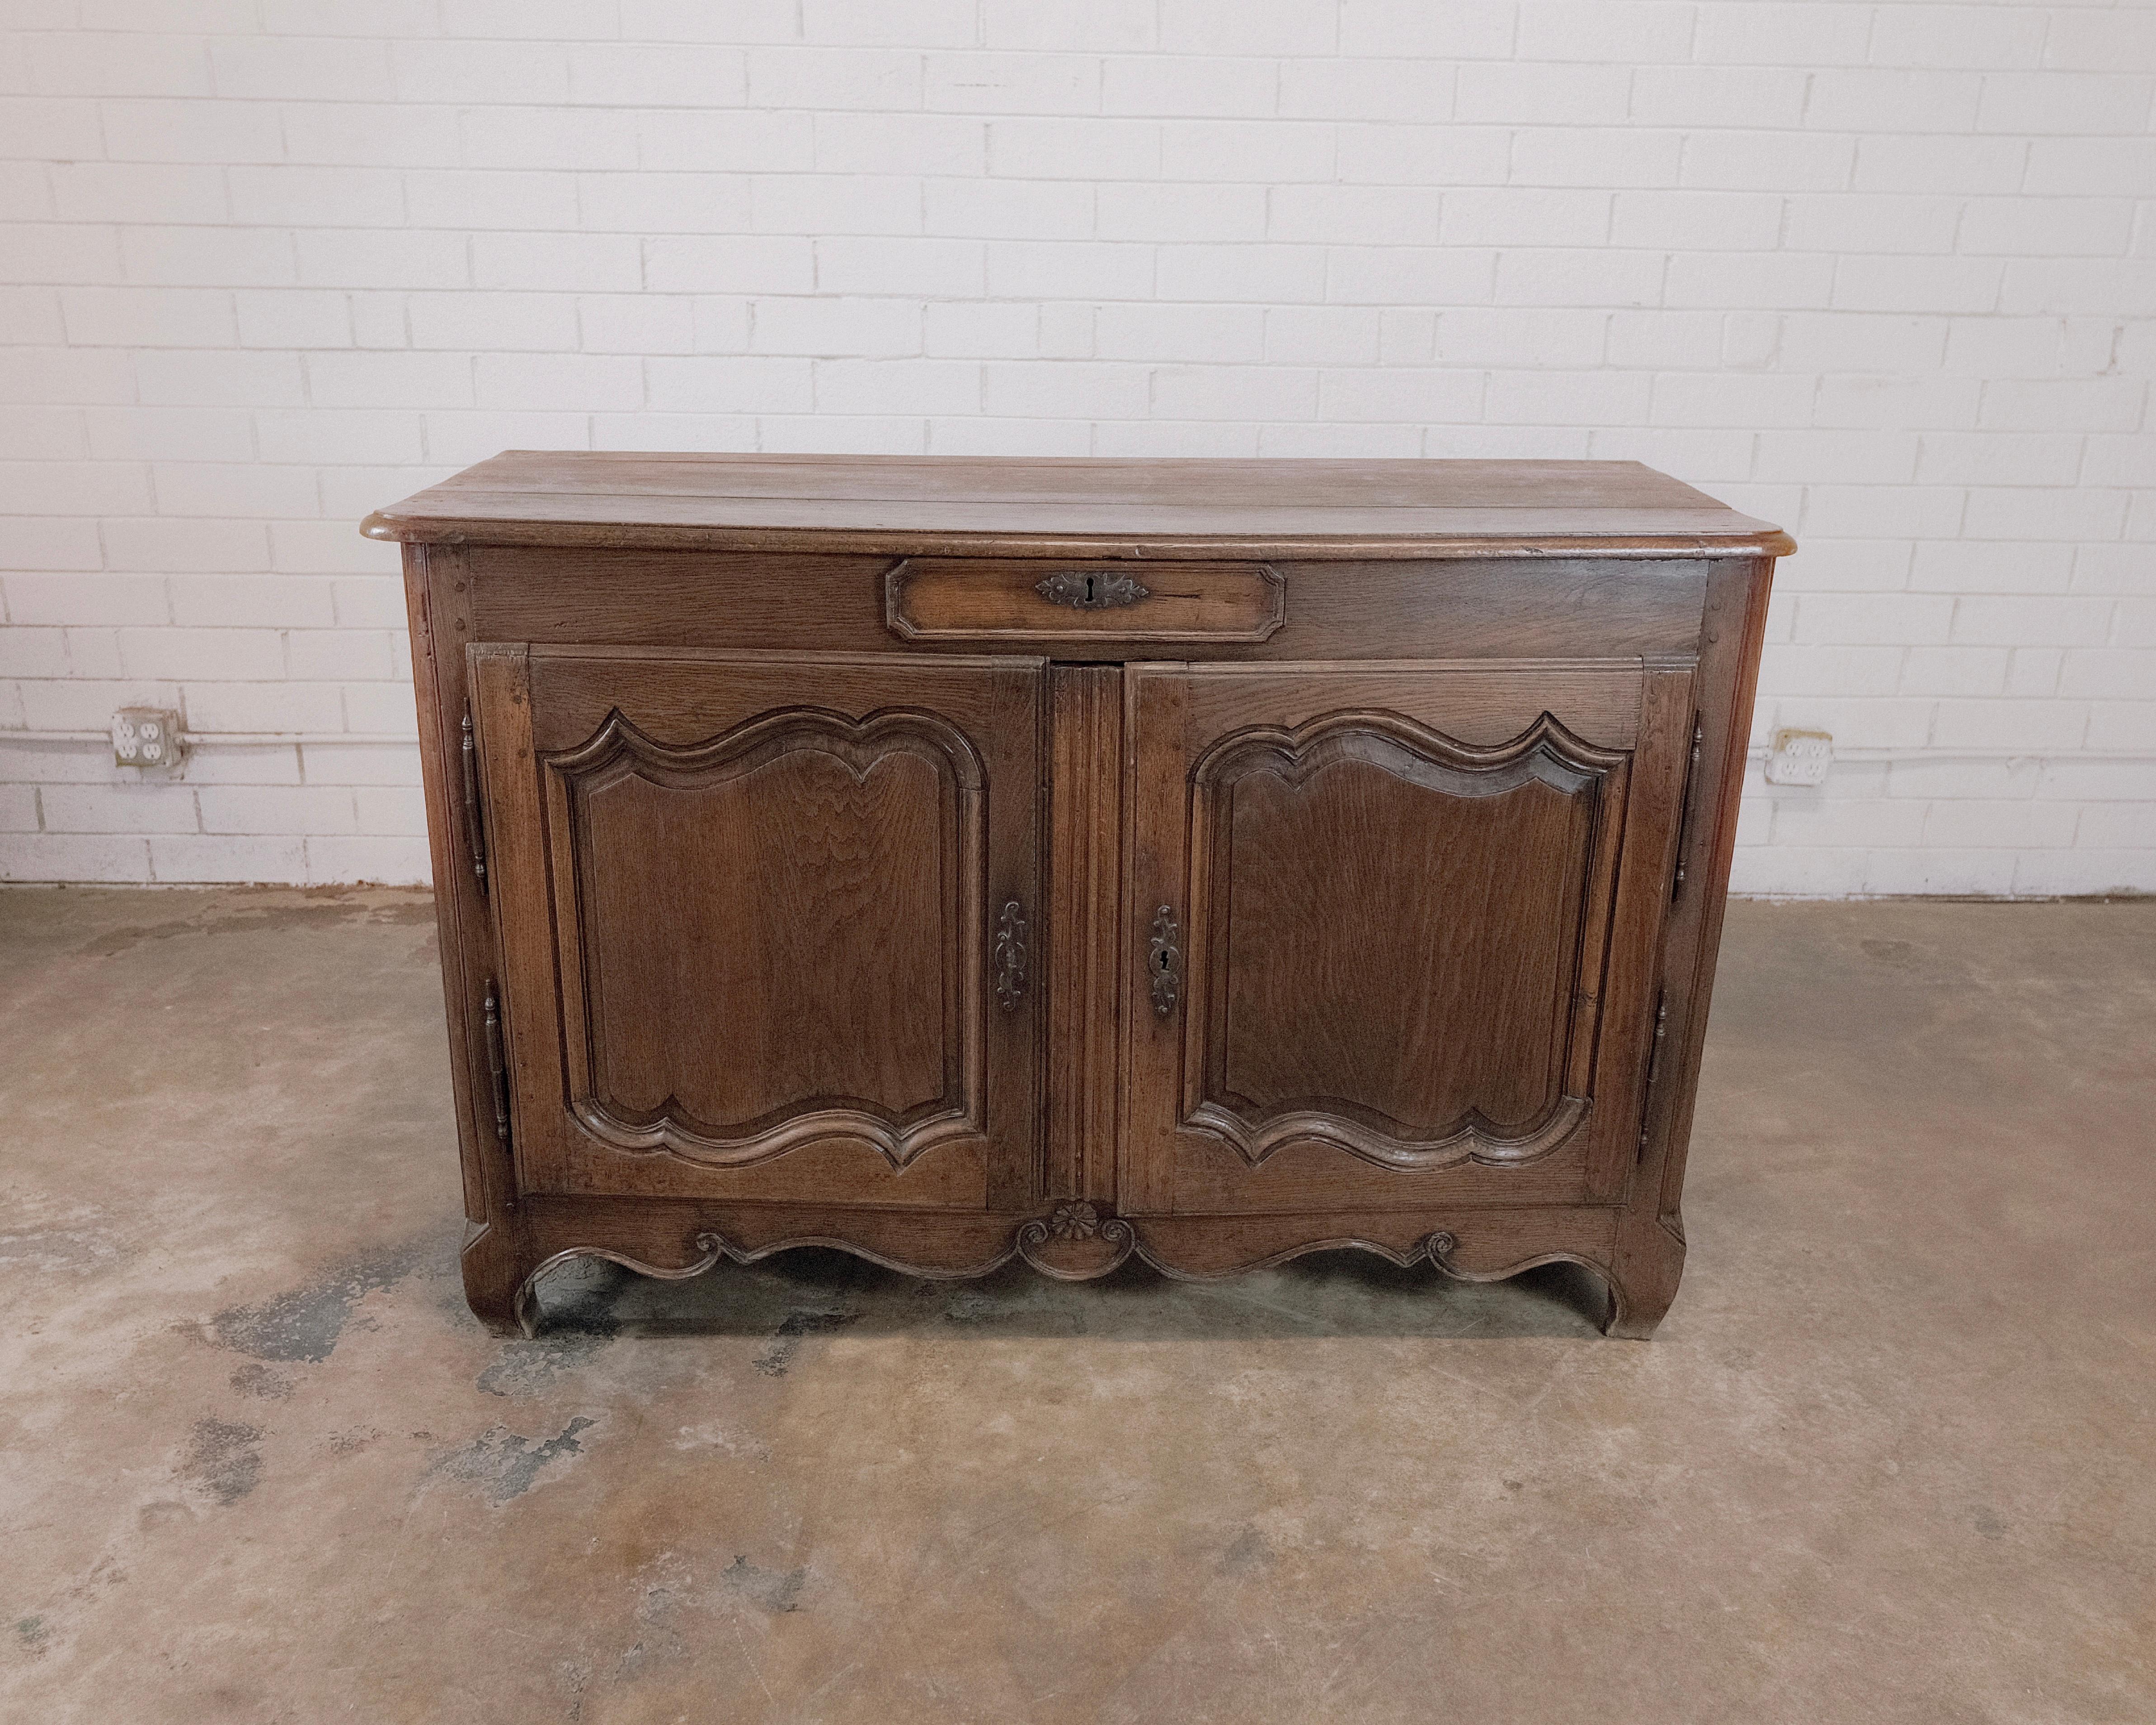 Experience the grace and heritage of the 19th Century with this exquisite French Sideboard, featuring two cabinets and a central drawer. Crafted with meticulous attention to detail, this piece is a true embodiment of the elegance and functionality